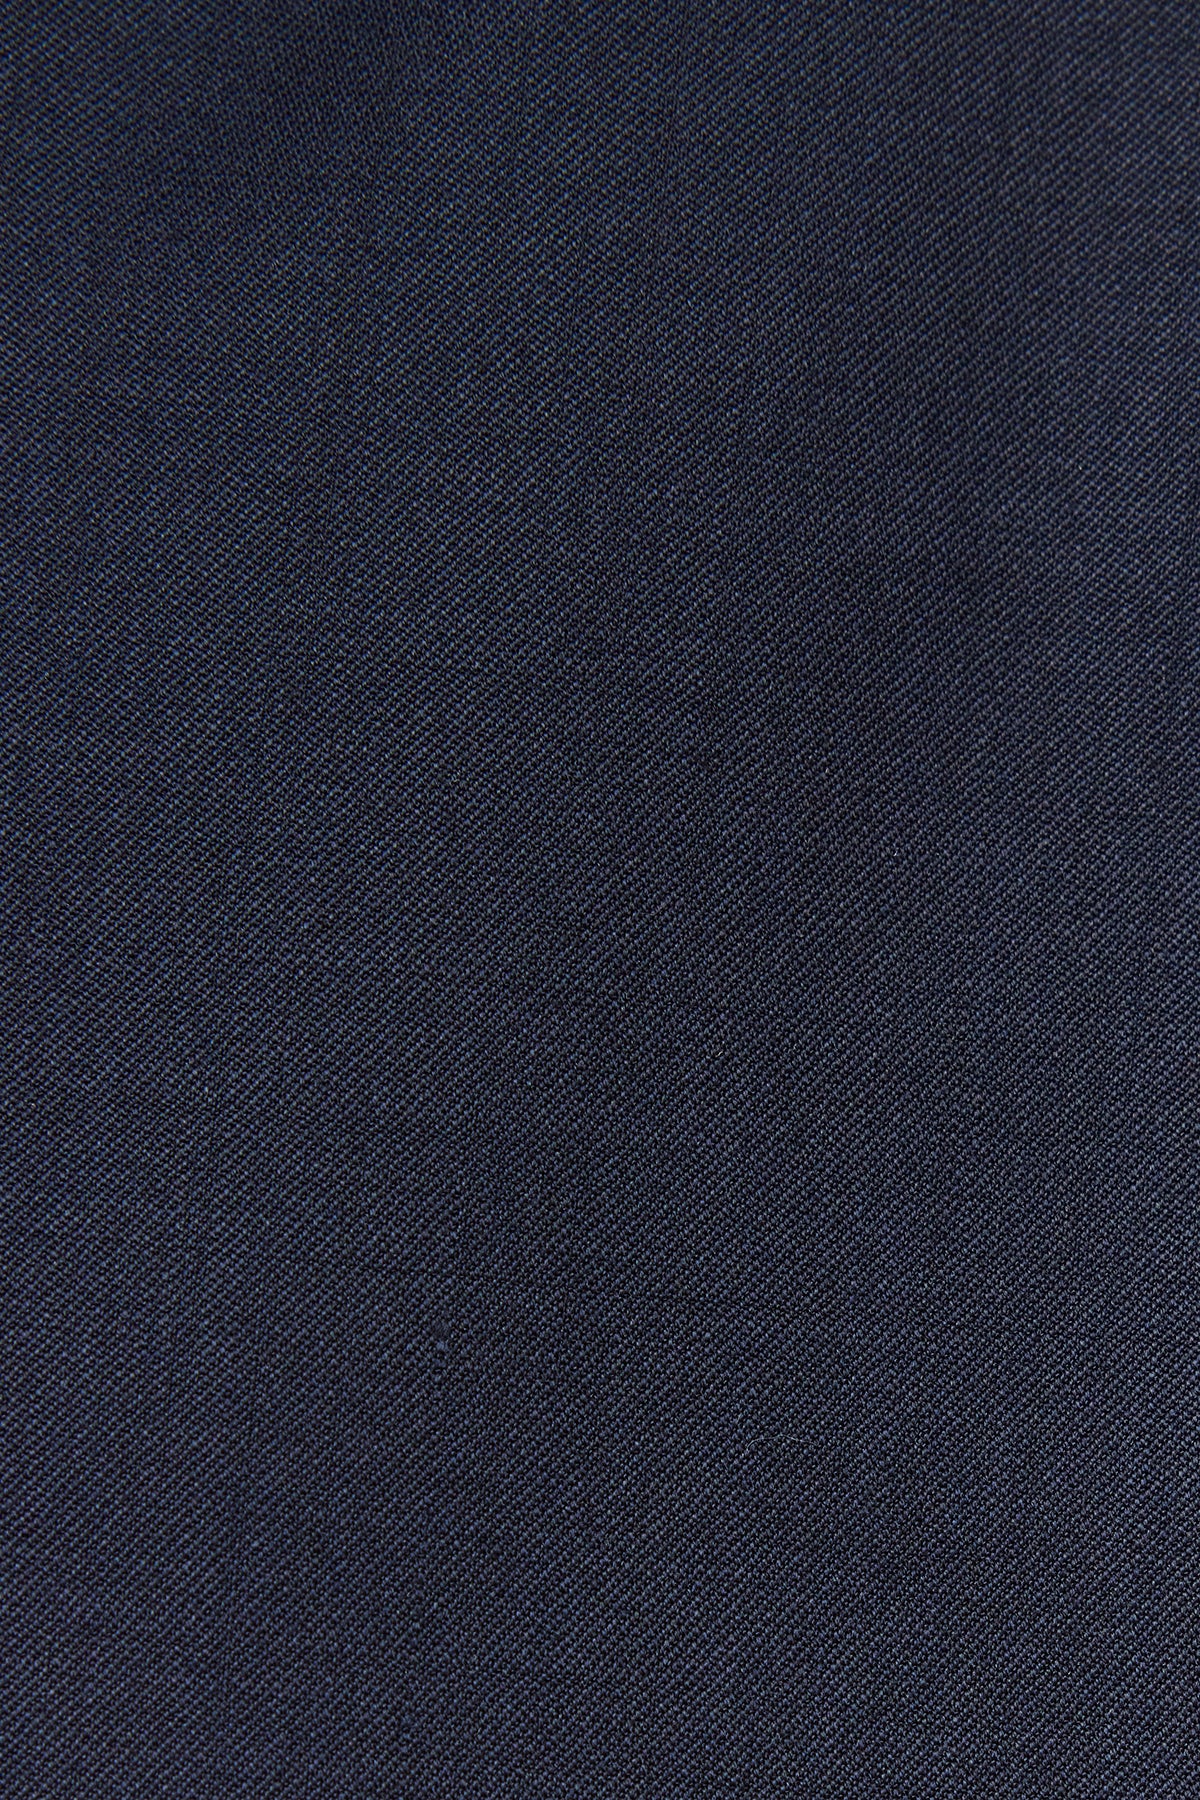 Ives - Navy Suit